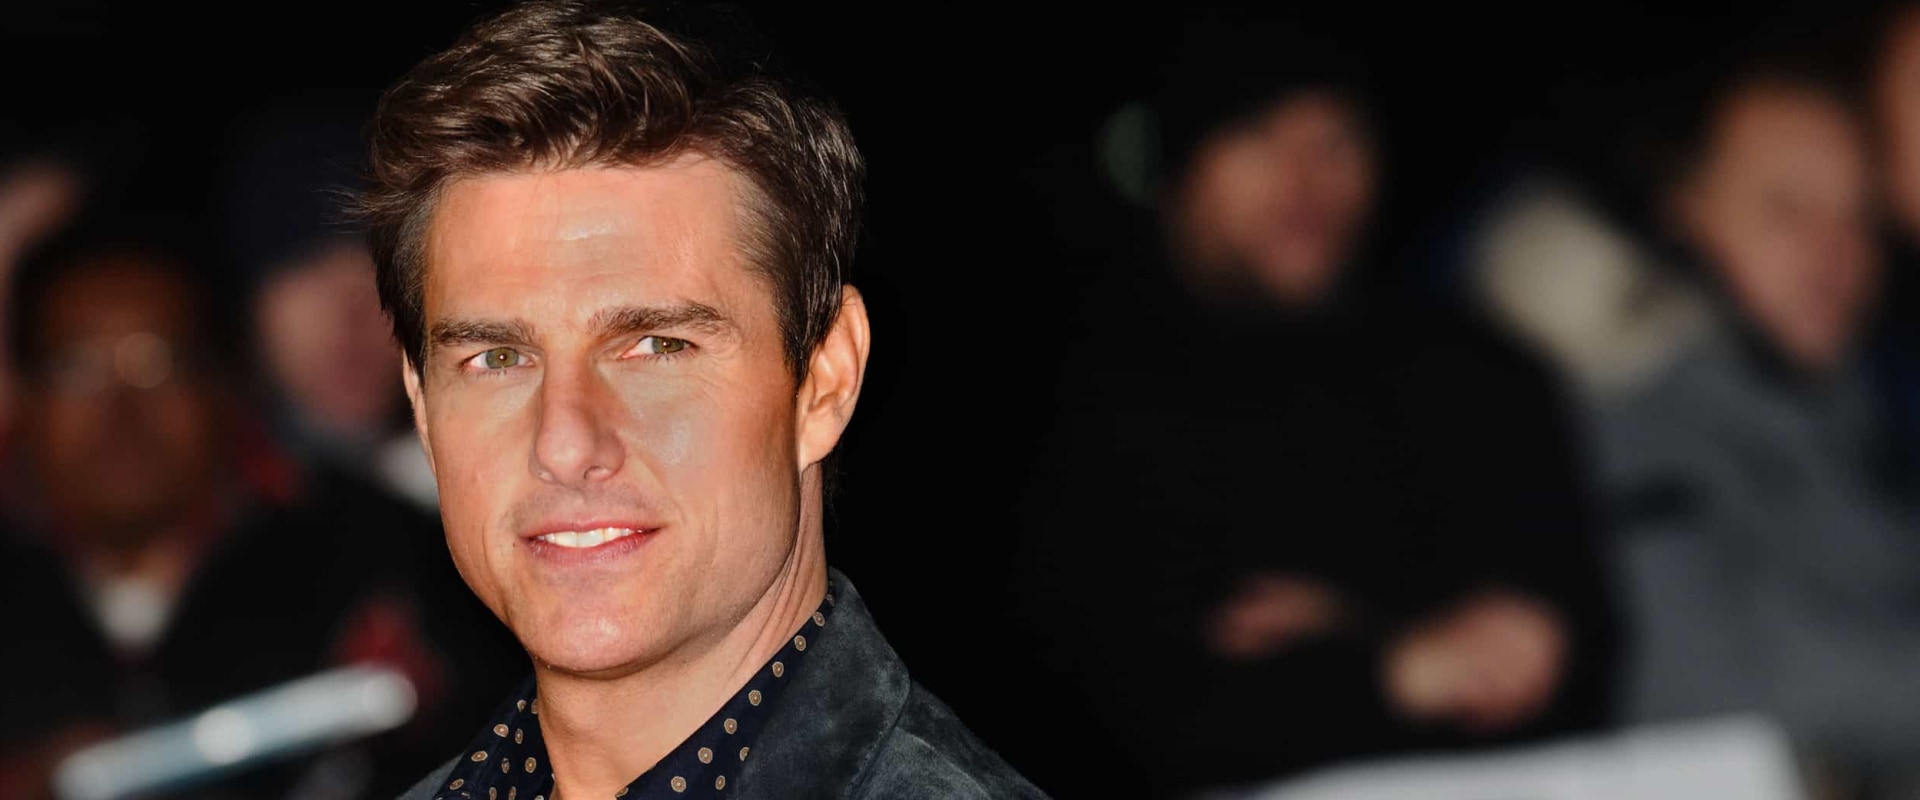 The Fascinating Life of Tom Cruise: From Canada to Hollywood Stardom